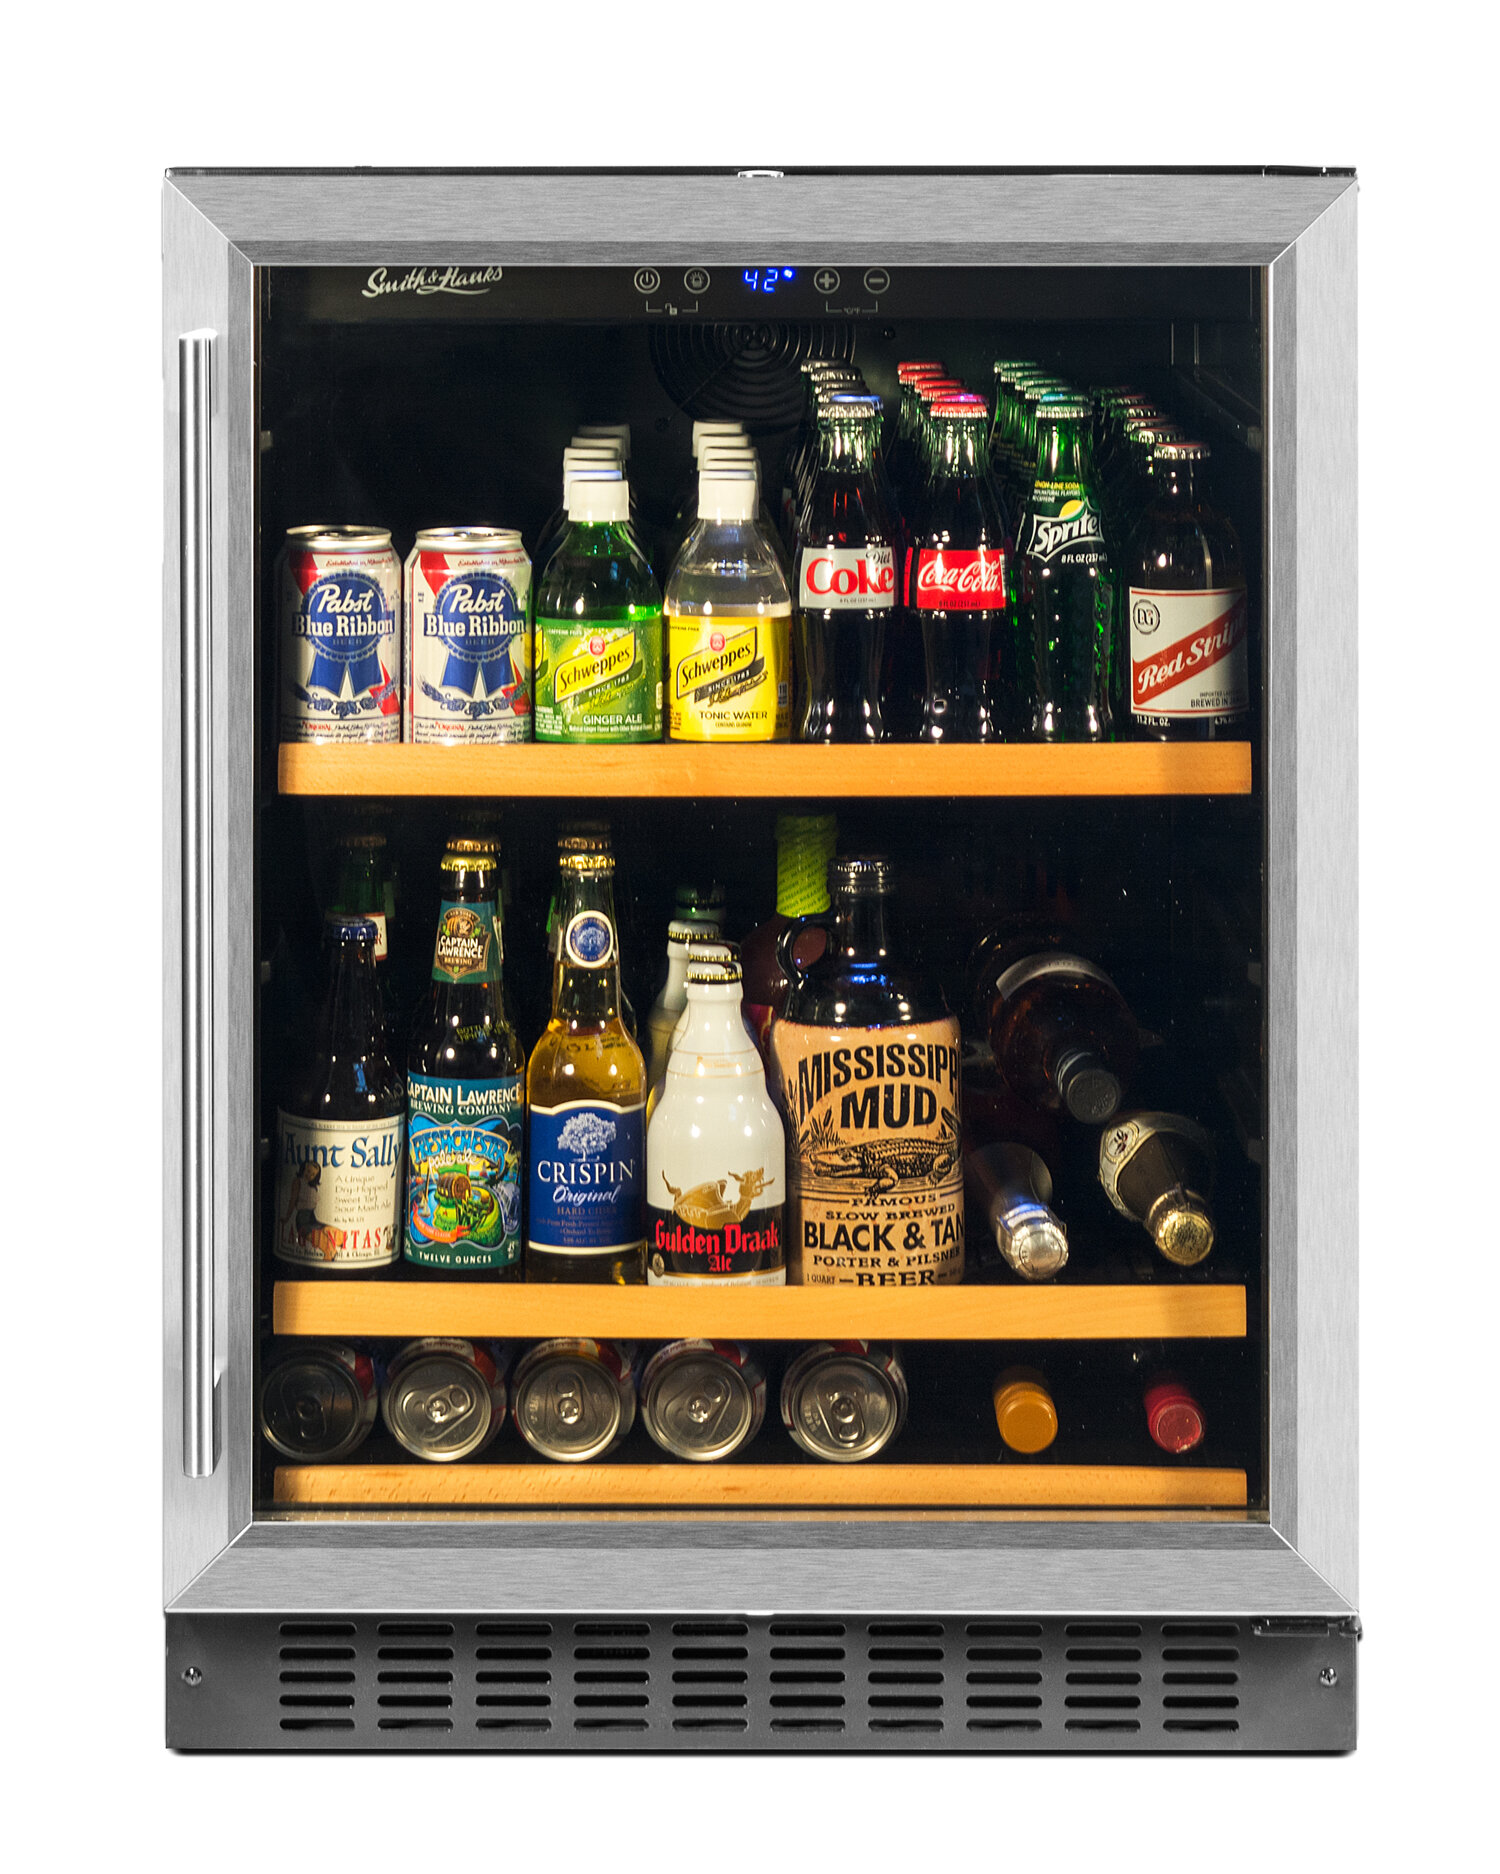 Lanbopro 112 Cans (12 oz.) 5.4 Cubic Feet Beverage Refrigerator with Wine  Storage & Reviews